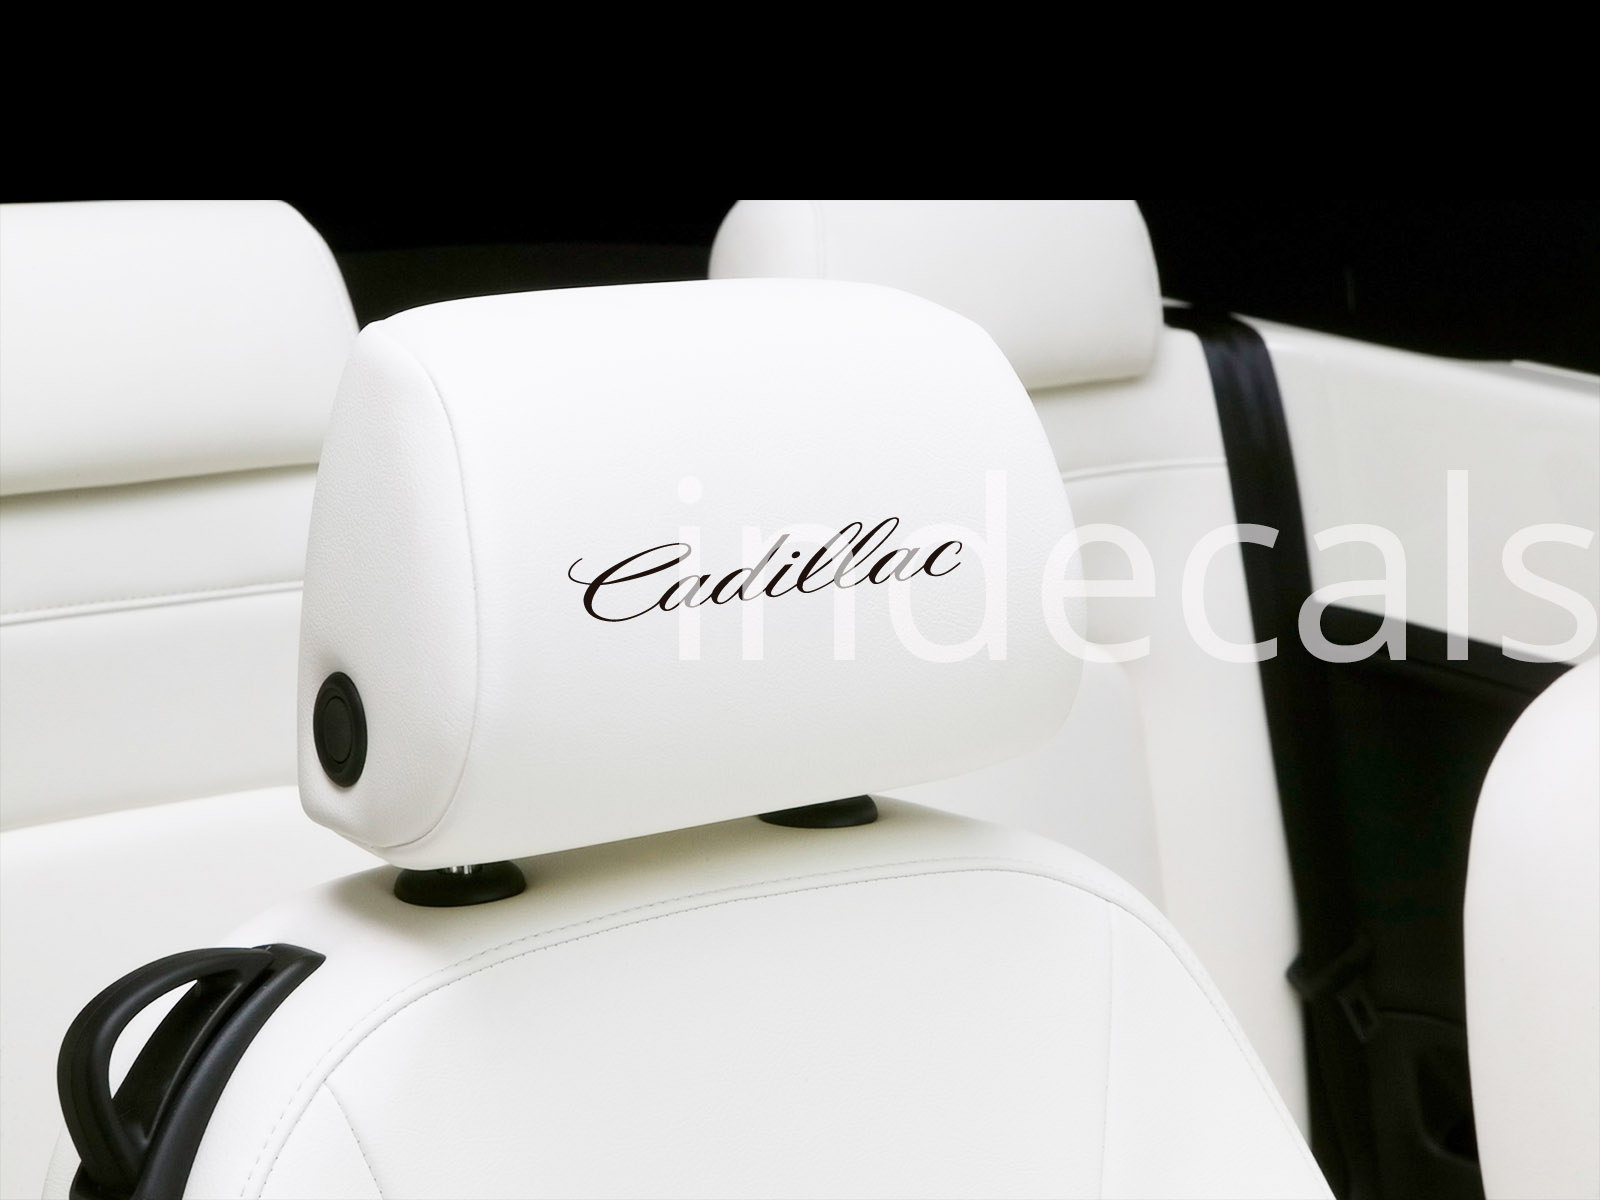 6 x Cadillac Stickers for Headrests - Black